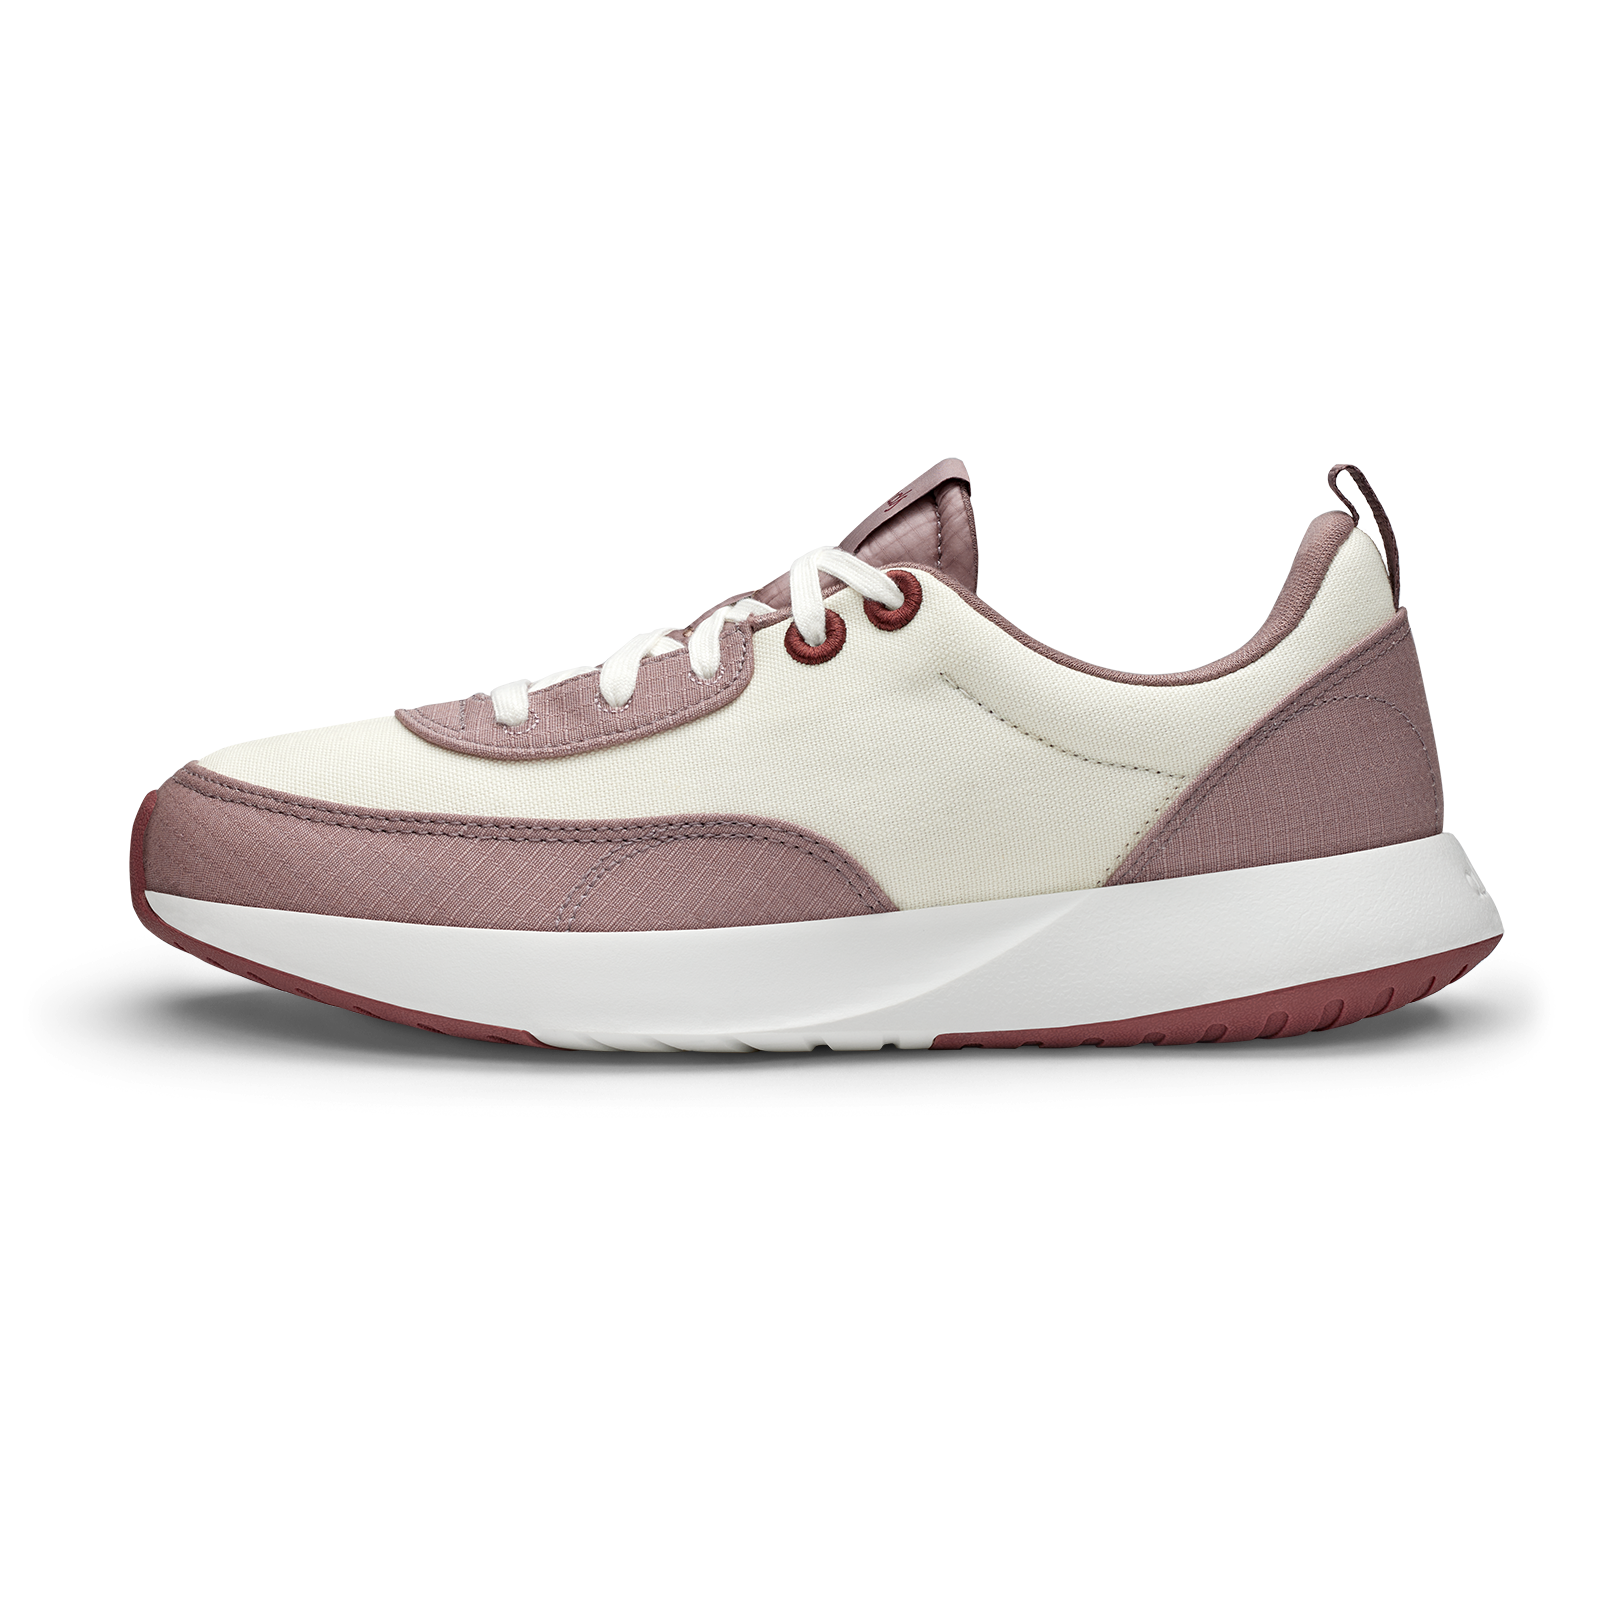 Women's Couriers - Natural White/Stormy Mauve (Blizzard Sole)